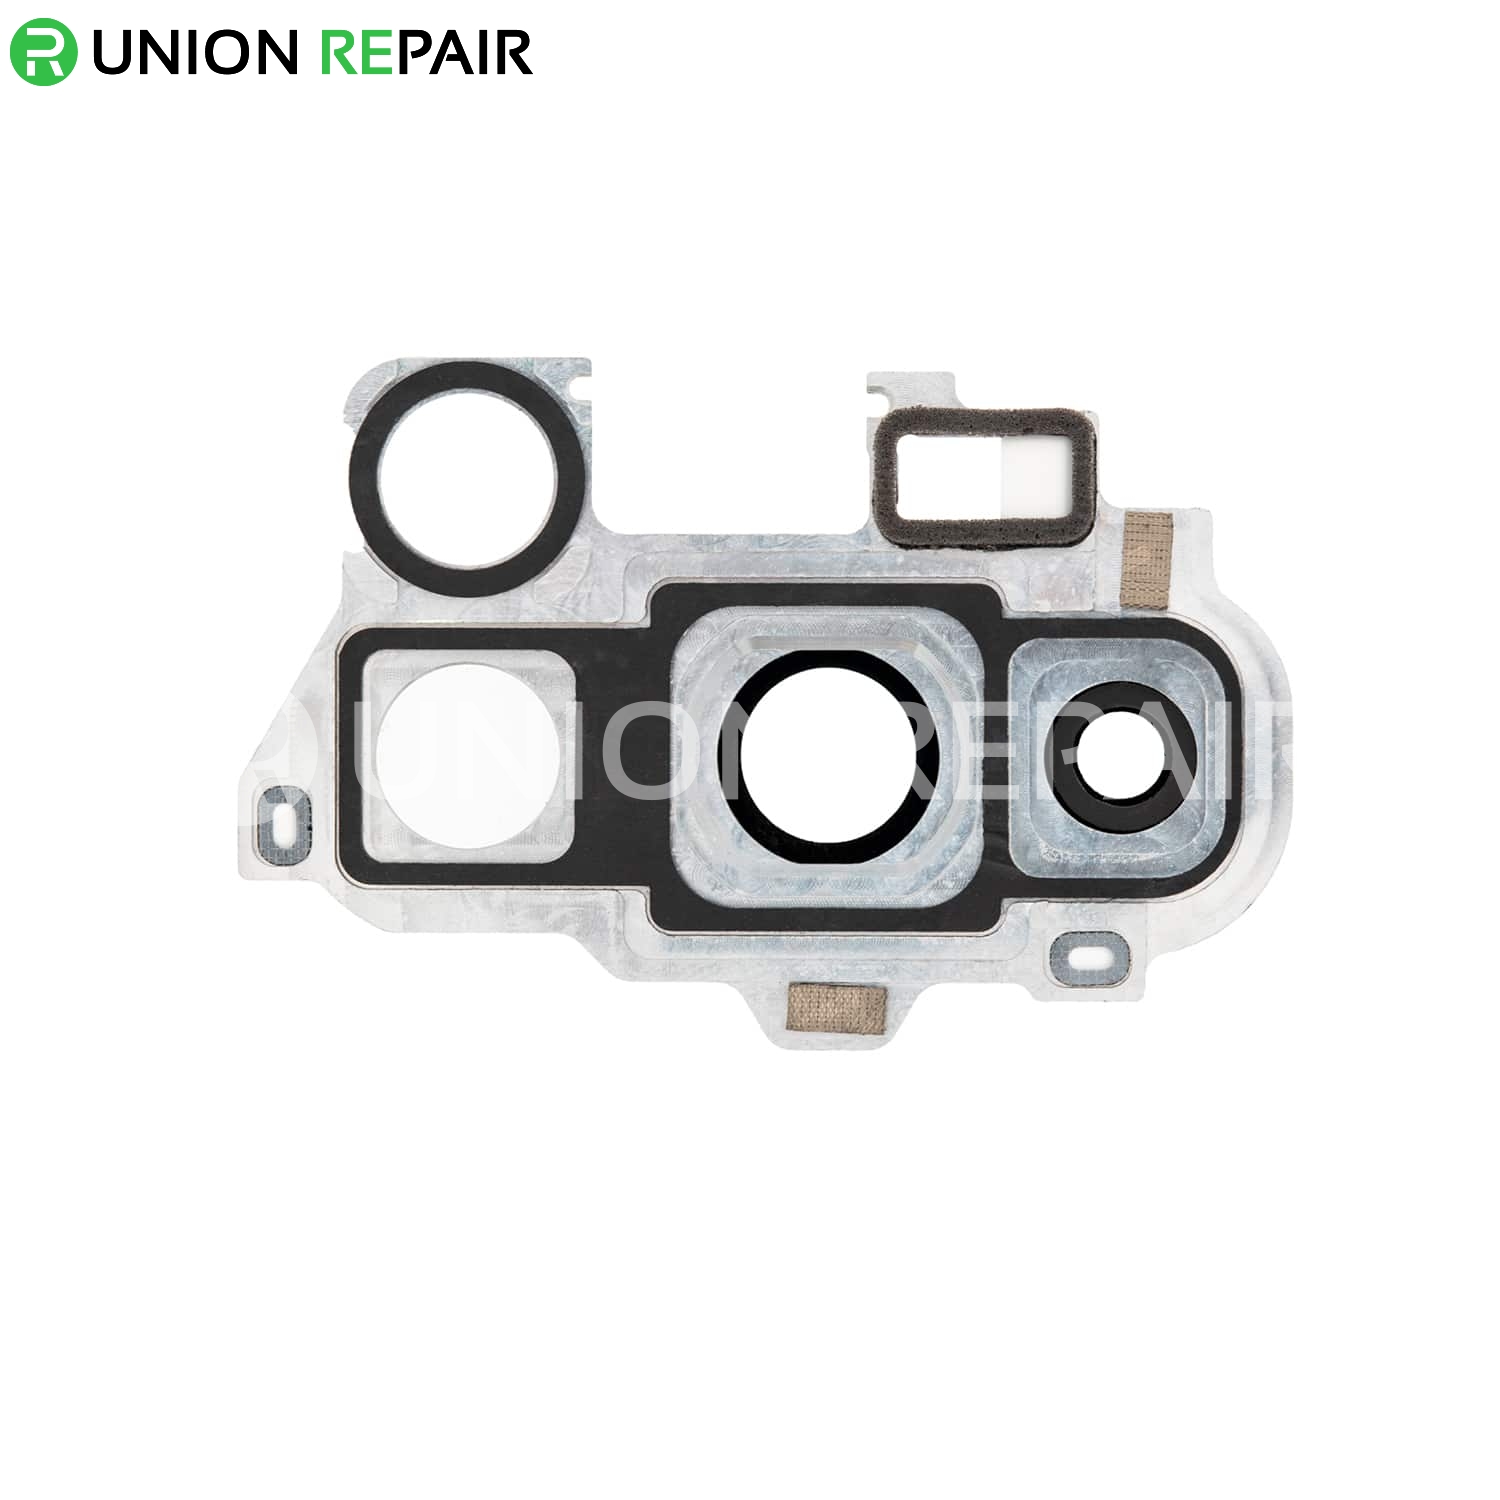 Replacement for OnePlus 8 Pro Rear Camera Holder with Lens - Silver